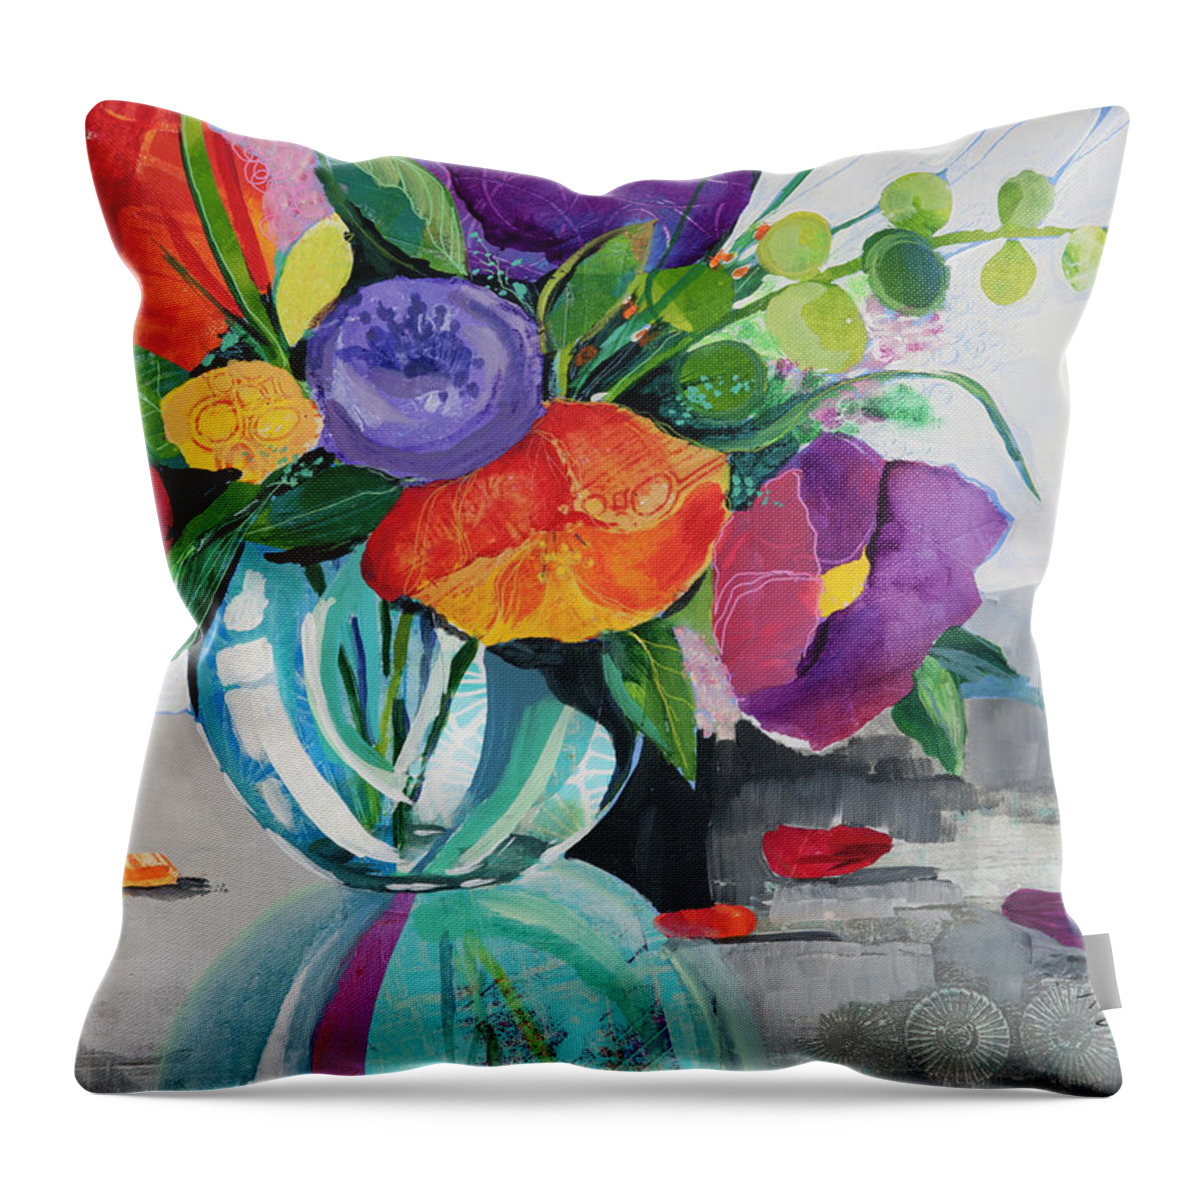  Throw Pillow featuring the mixed media Colorful Vessel by Julie Tibus